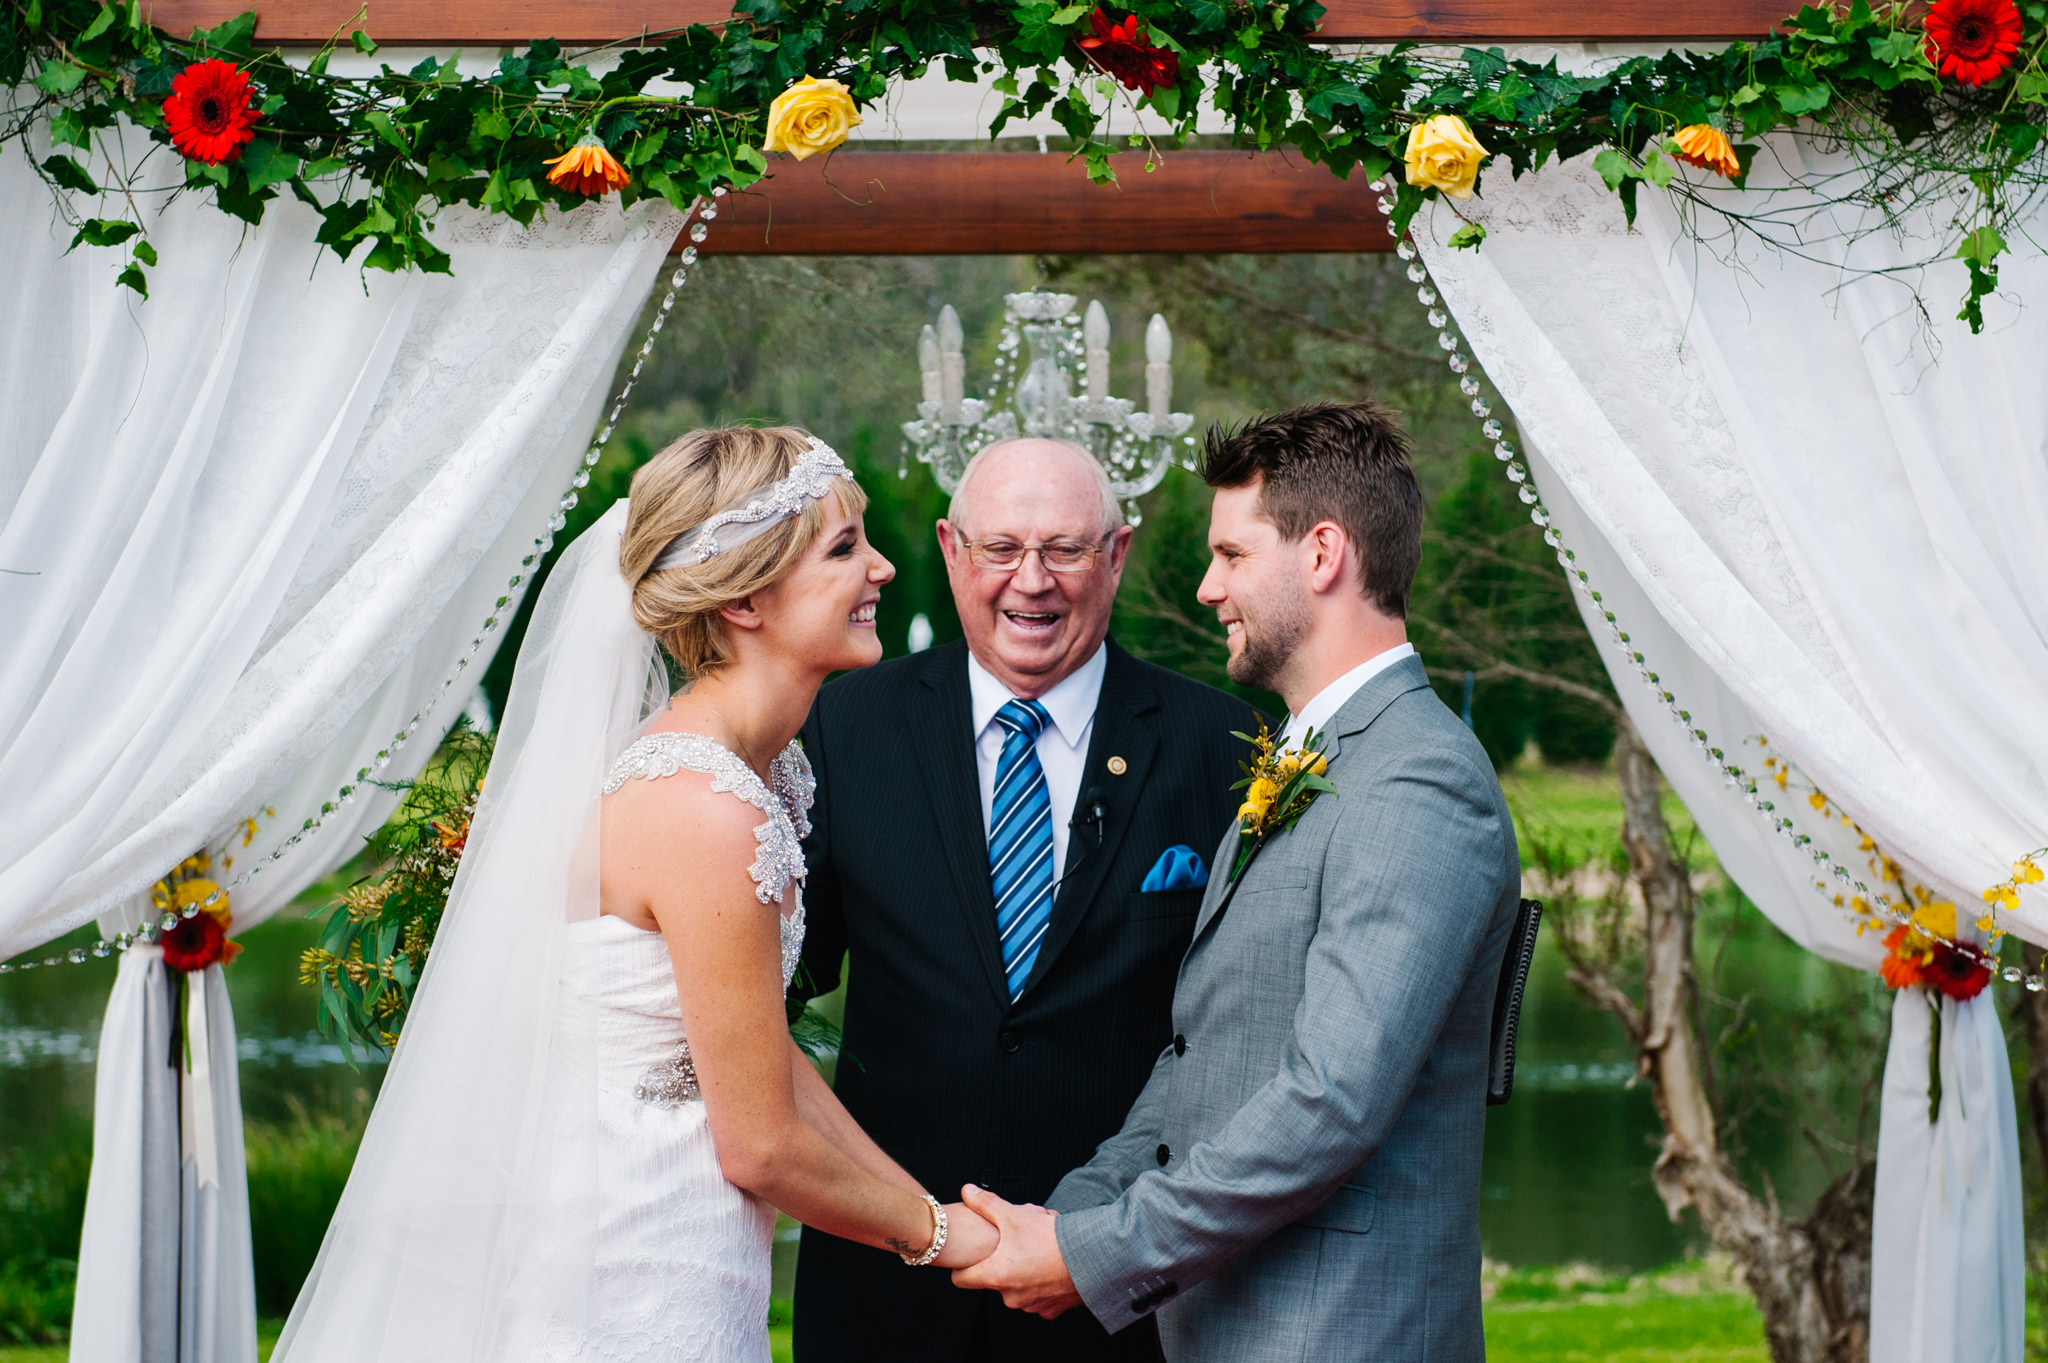 Bride and groom during ceremony under boho arbour at country wedding